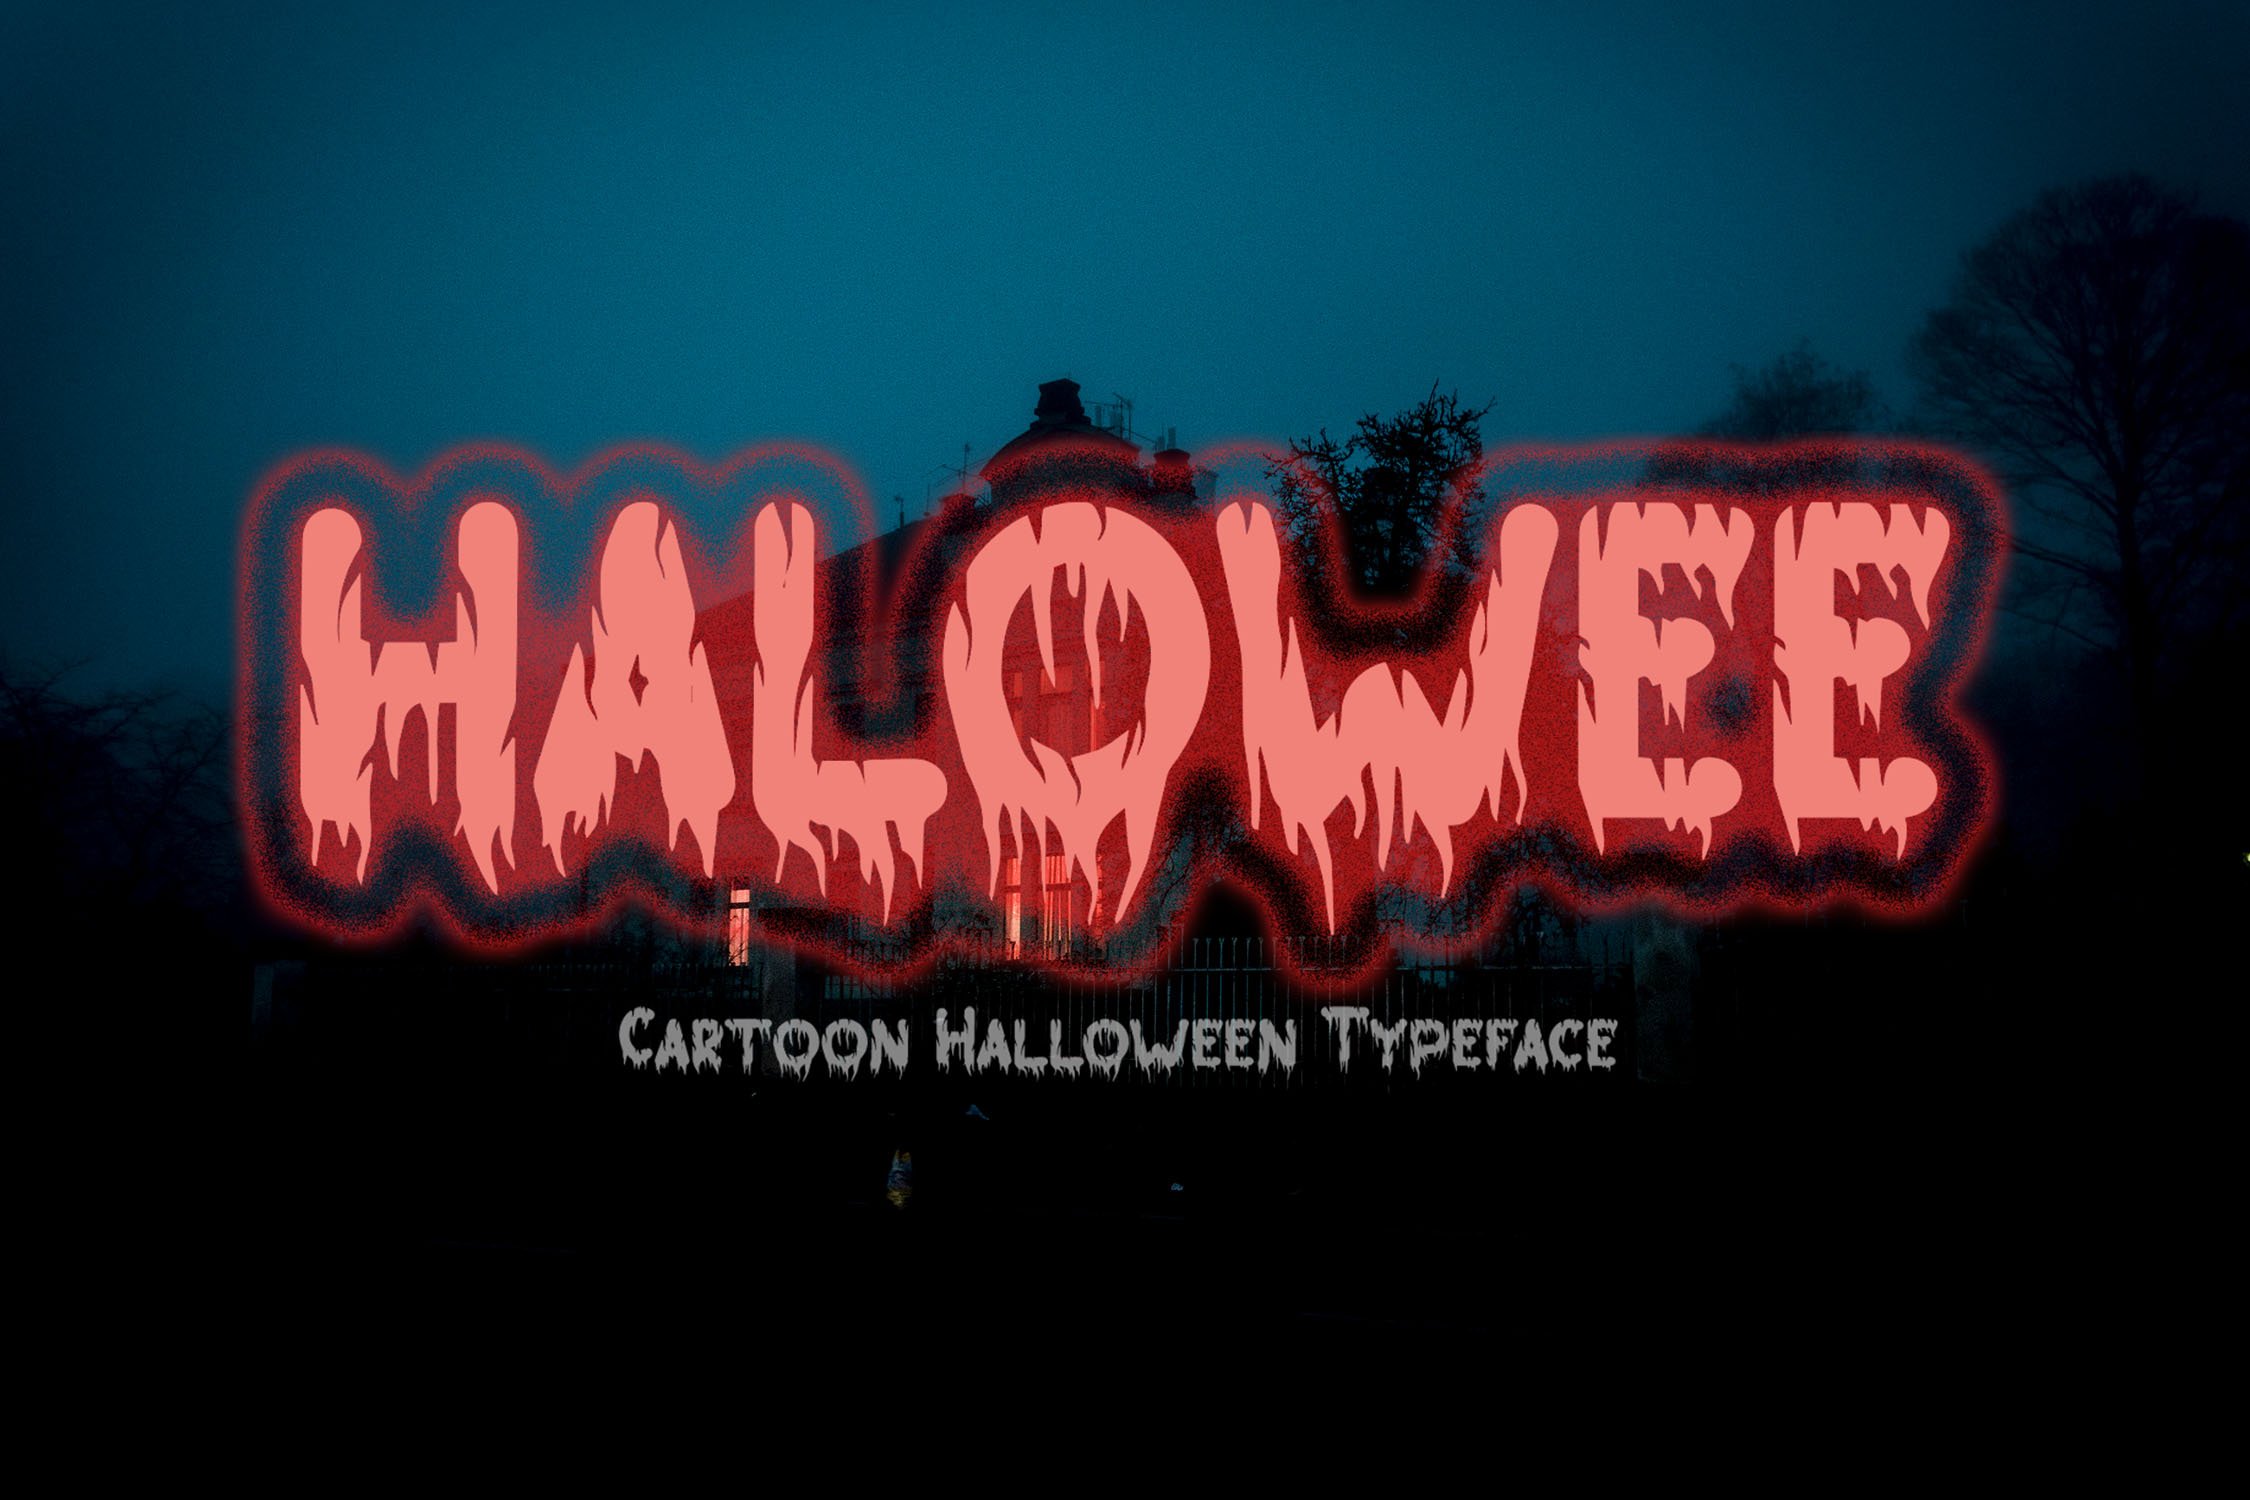 HALOWEE - Halloween Horror Font cover image.